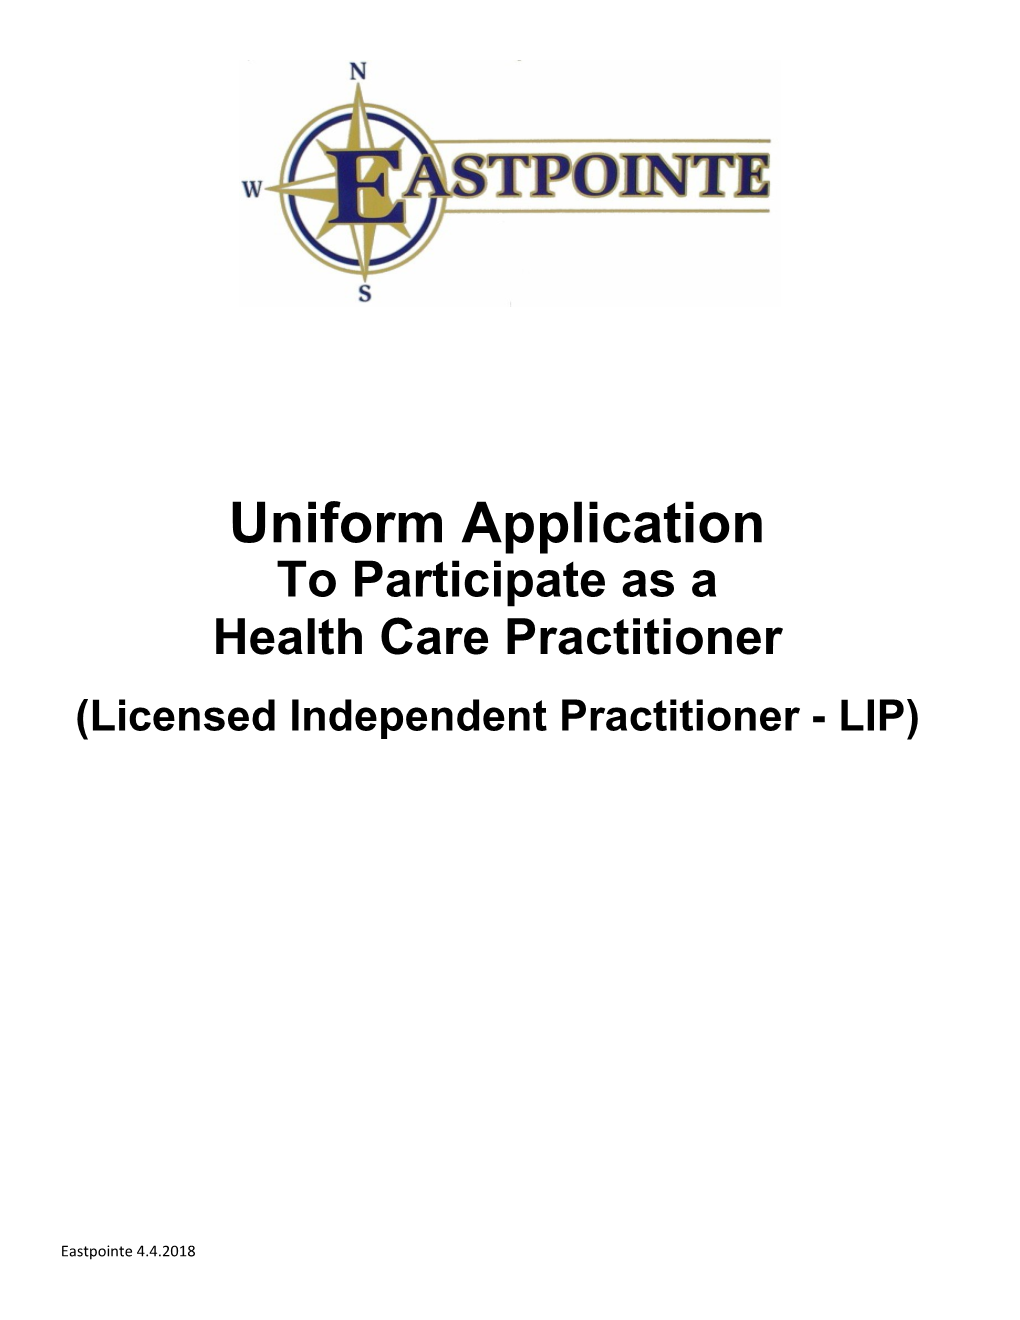 Health Care Practitioner